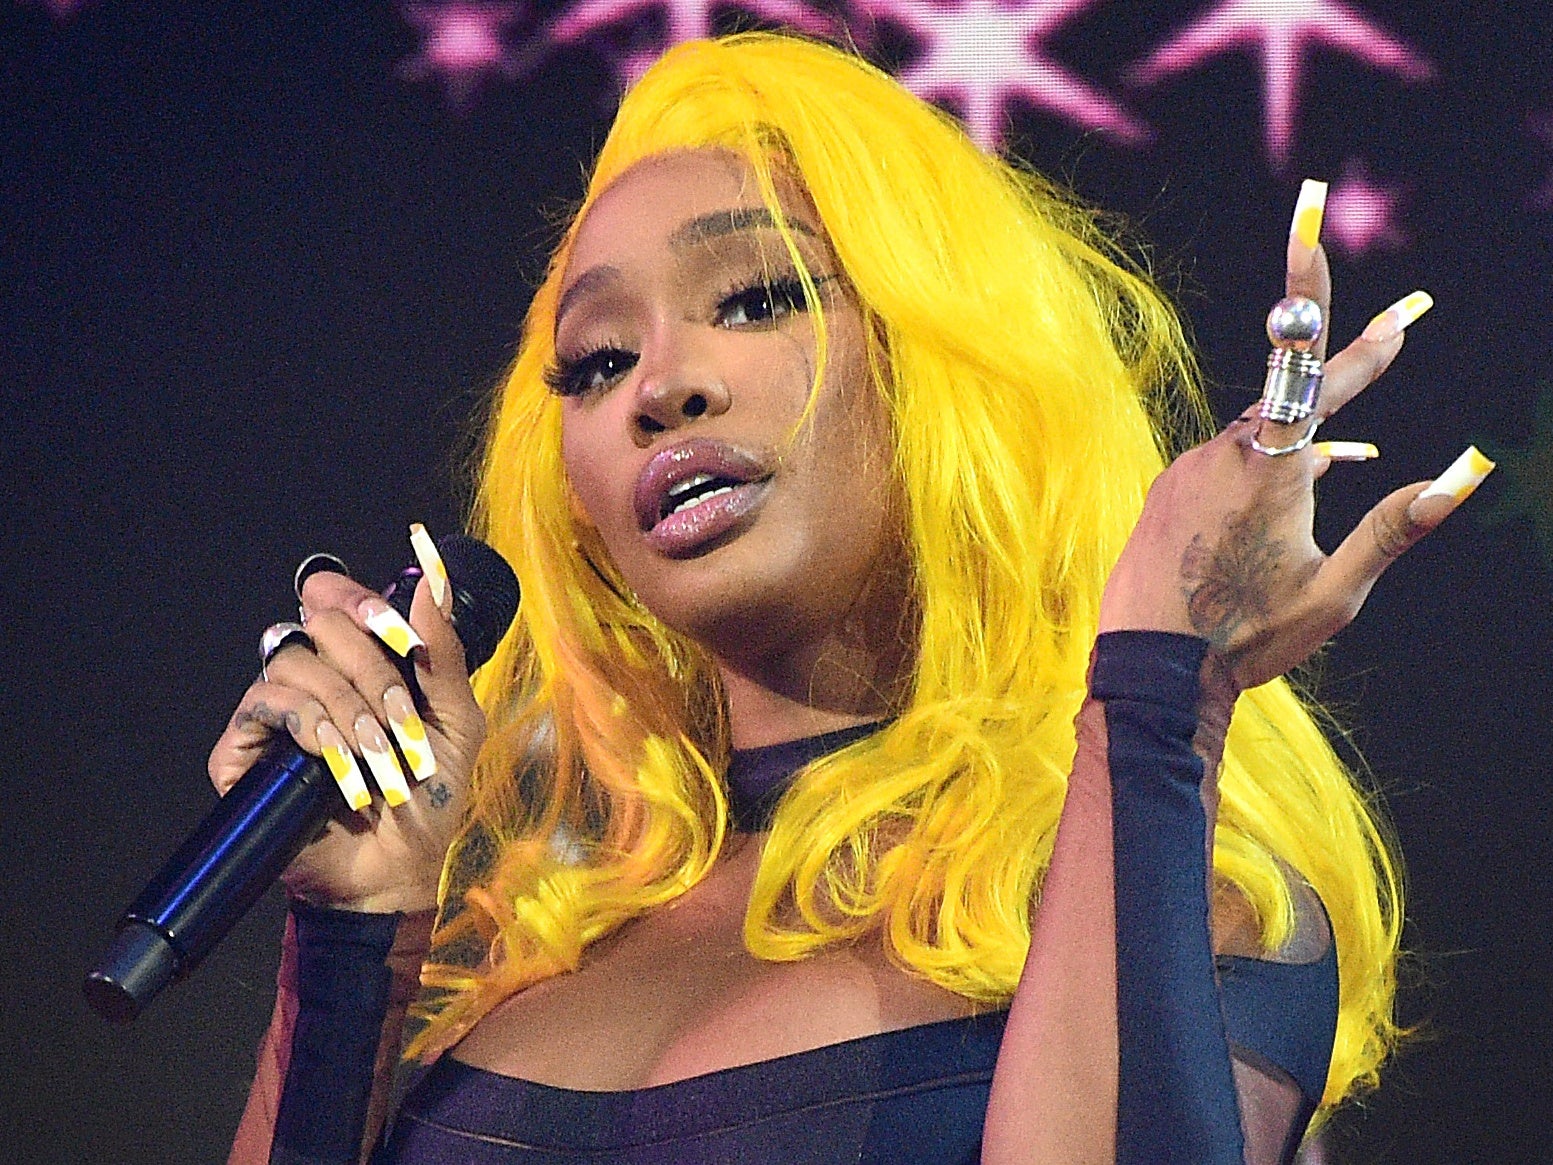 Sza, Saweetie, H.E.R. And More Shine, Shine At The 2021 Billboard Awards